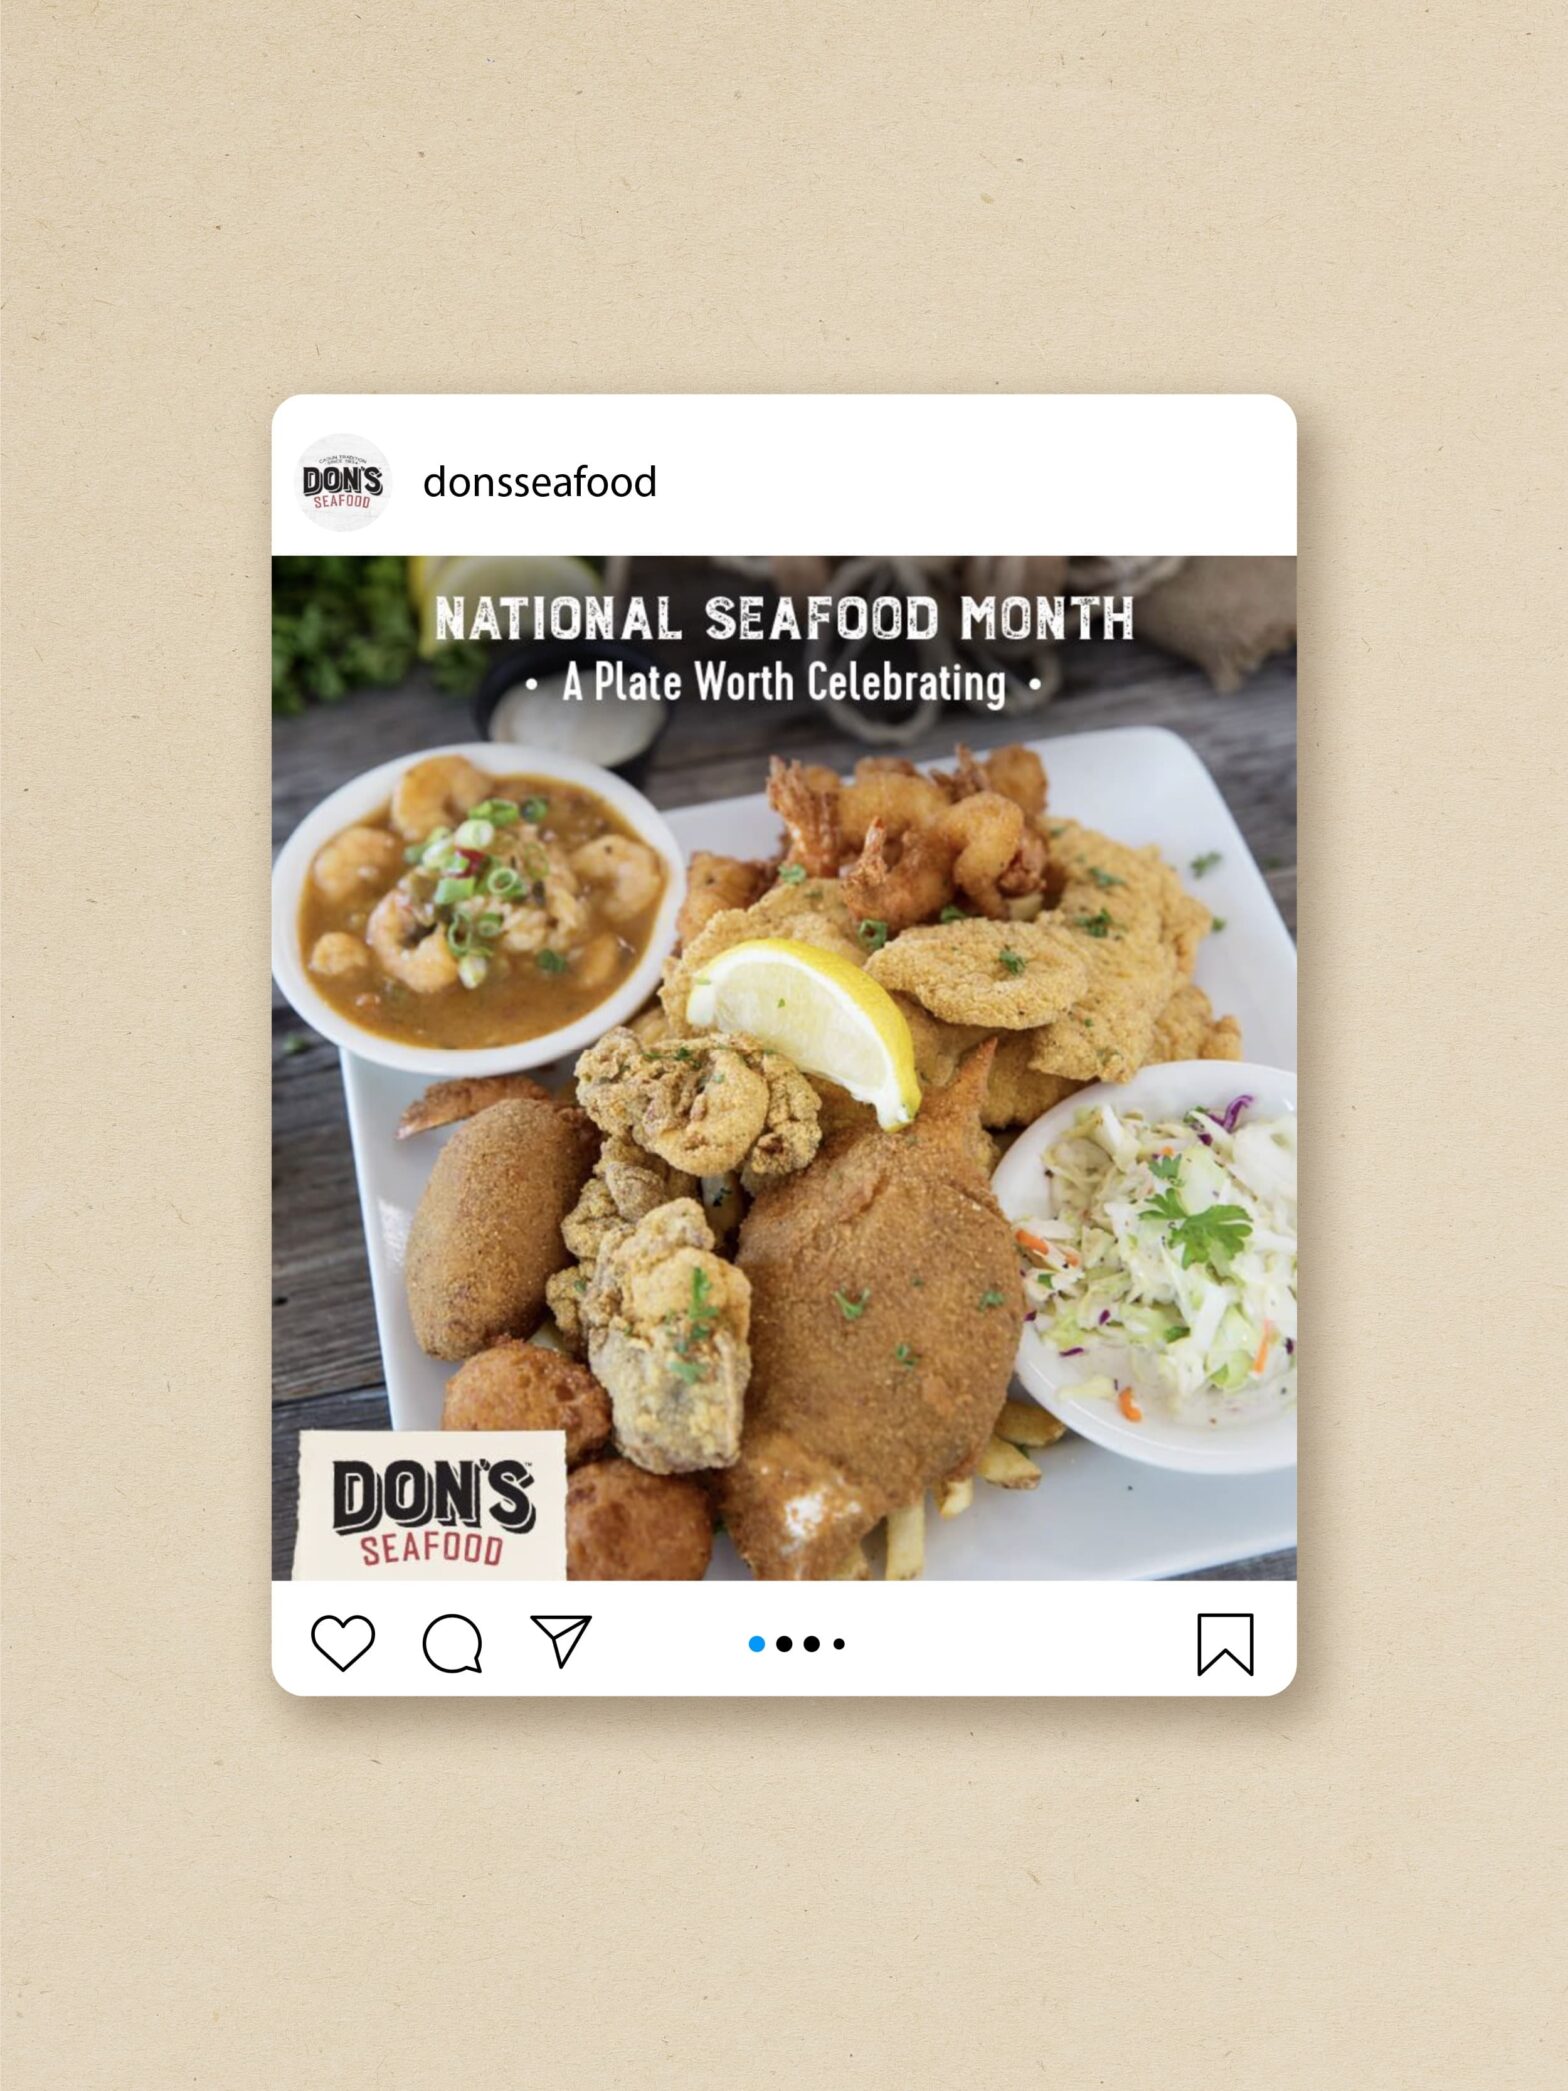 Instagram post. Photo: fried seafood platter, caption: "National Seafood Month: A Plate Worth Celebrating"